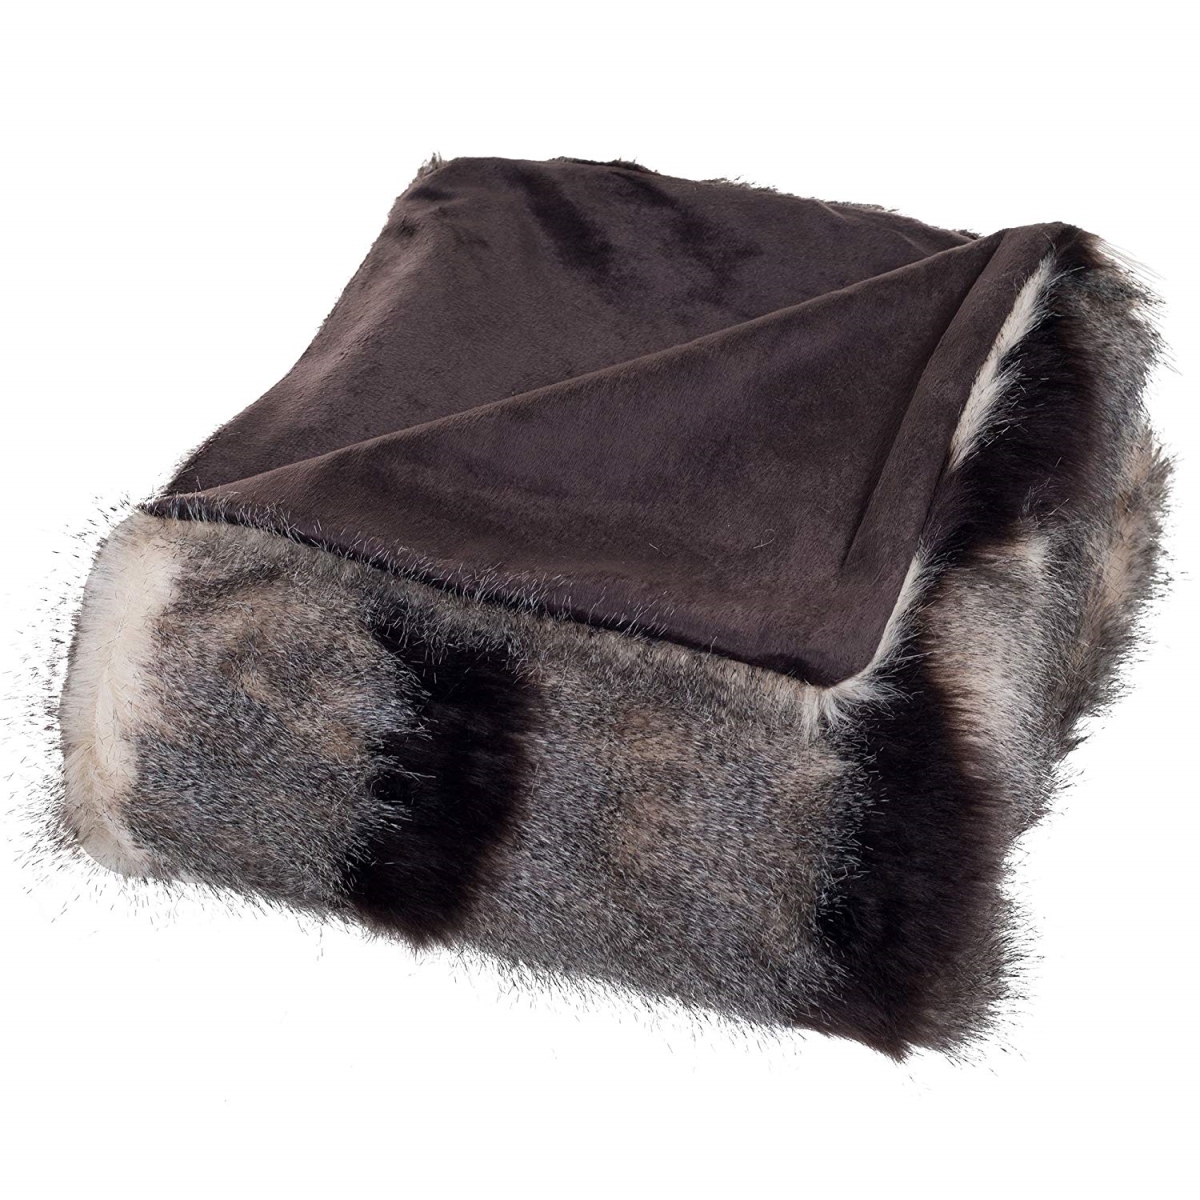 61a-26638 Luxury Long Haired Striped Faux Fur Throw Blanket, Brown